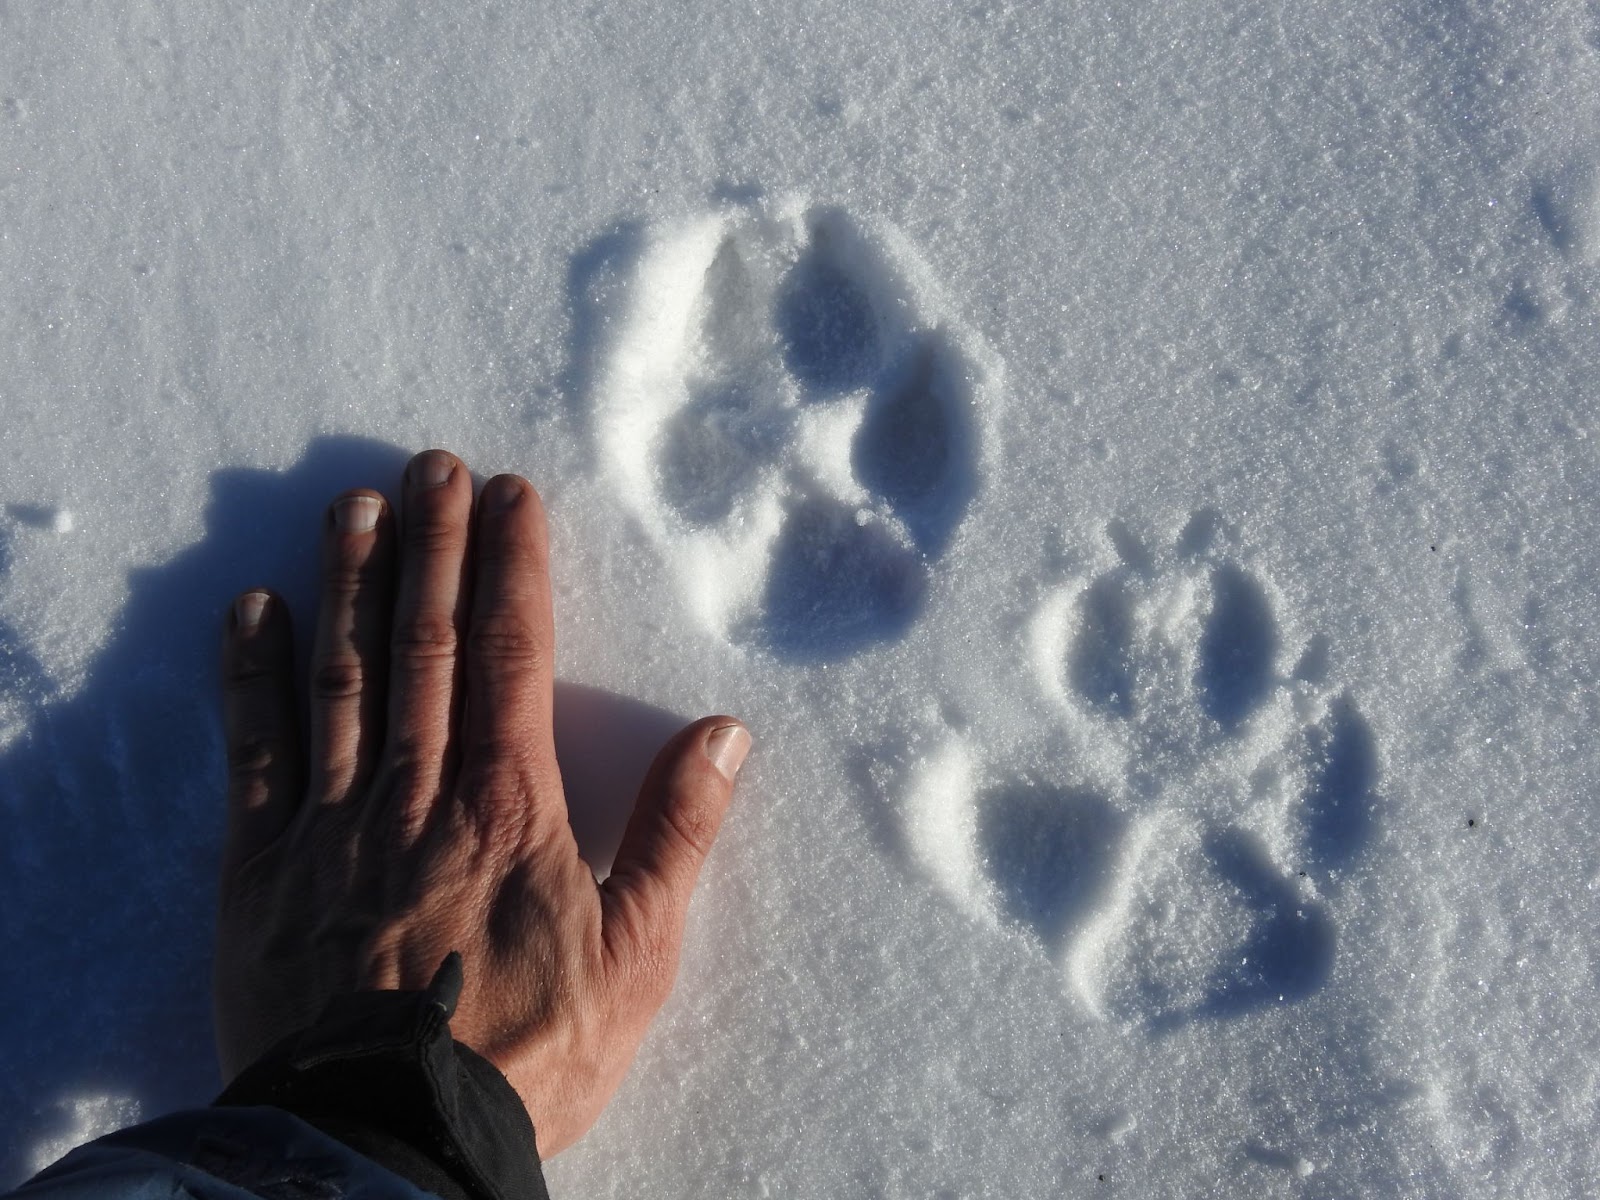 Wolf tracks in the snow next to a human hand for size comparison.